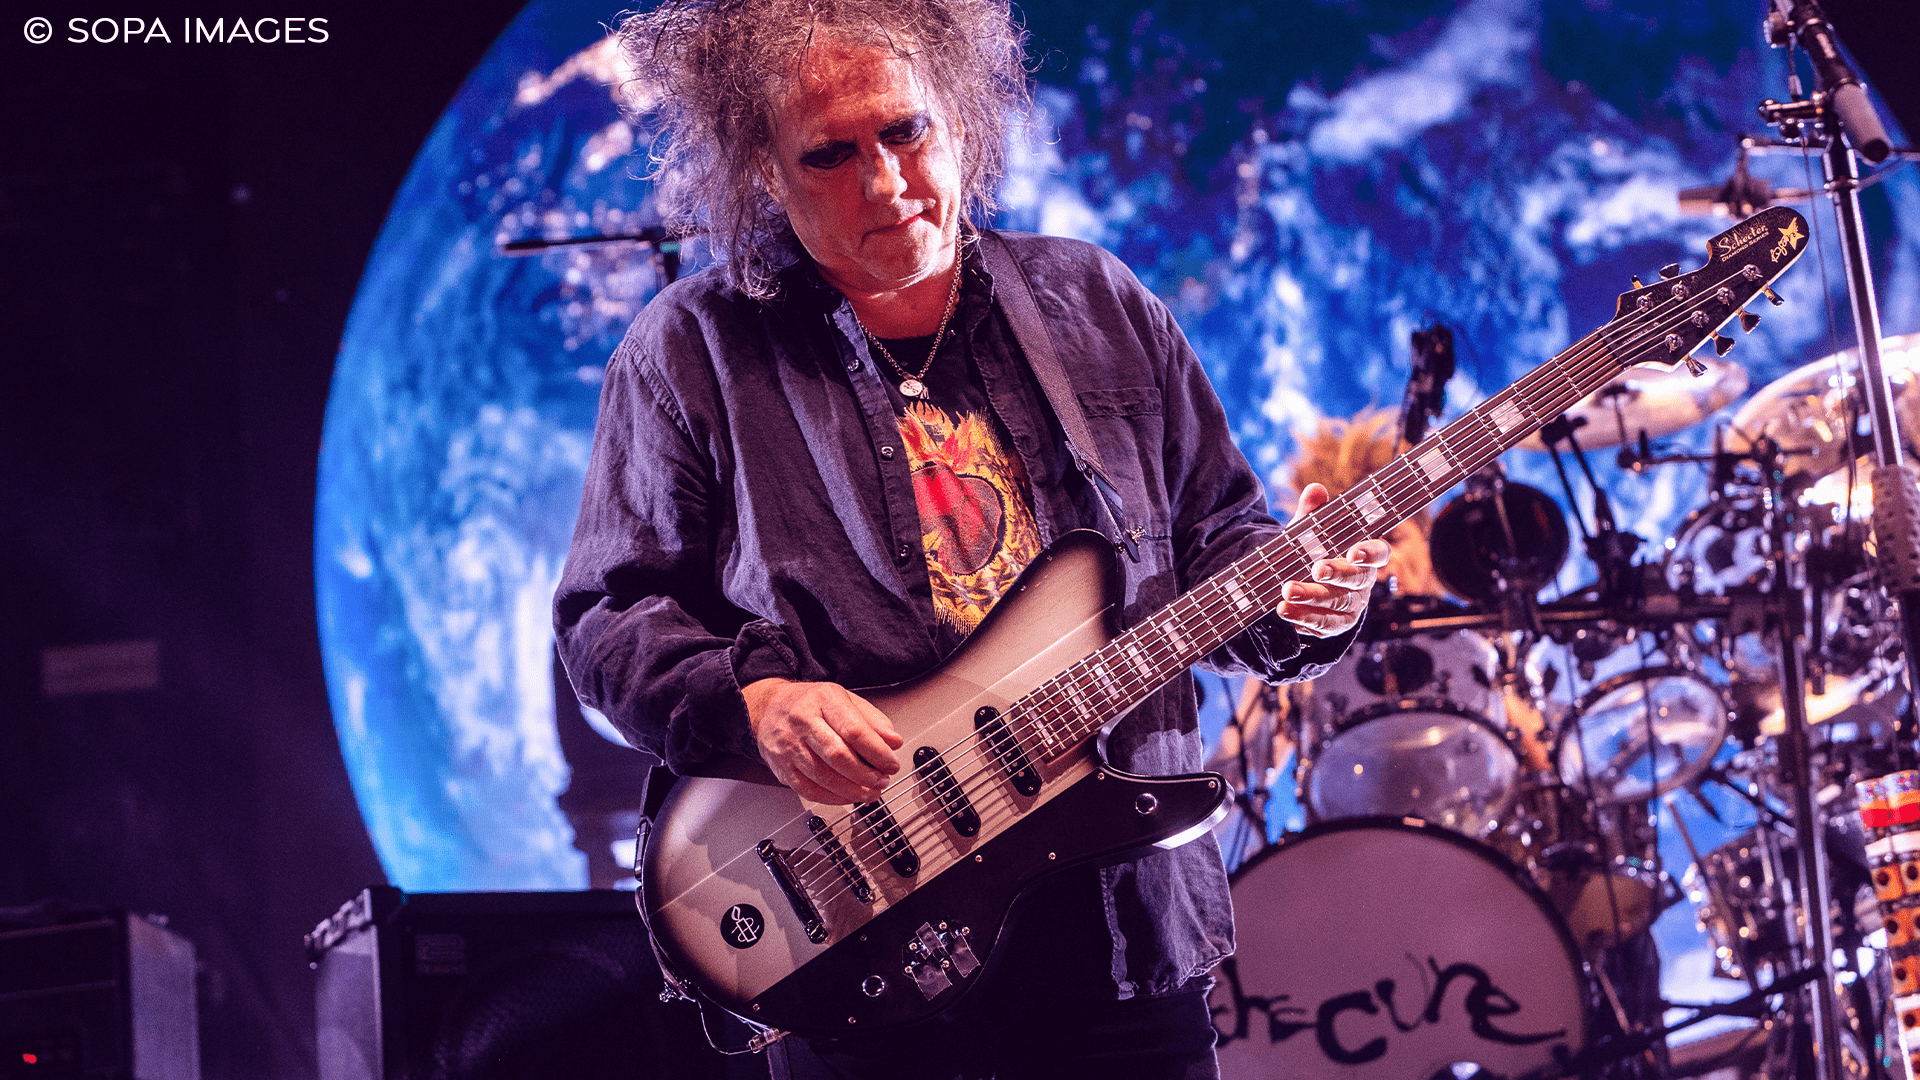 The Cure Announces 2023 North American Tour WABC MUSIC RADIO New